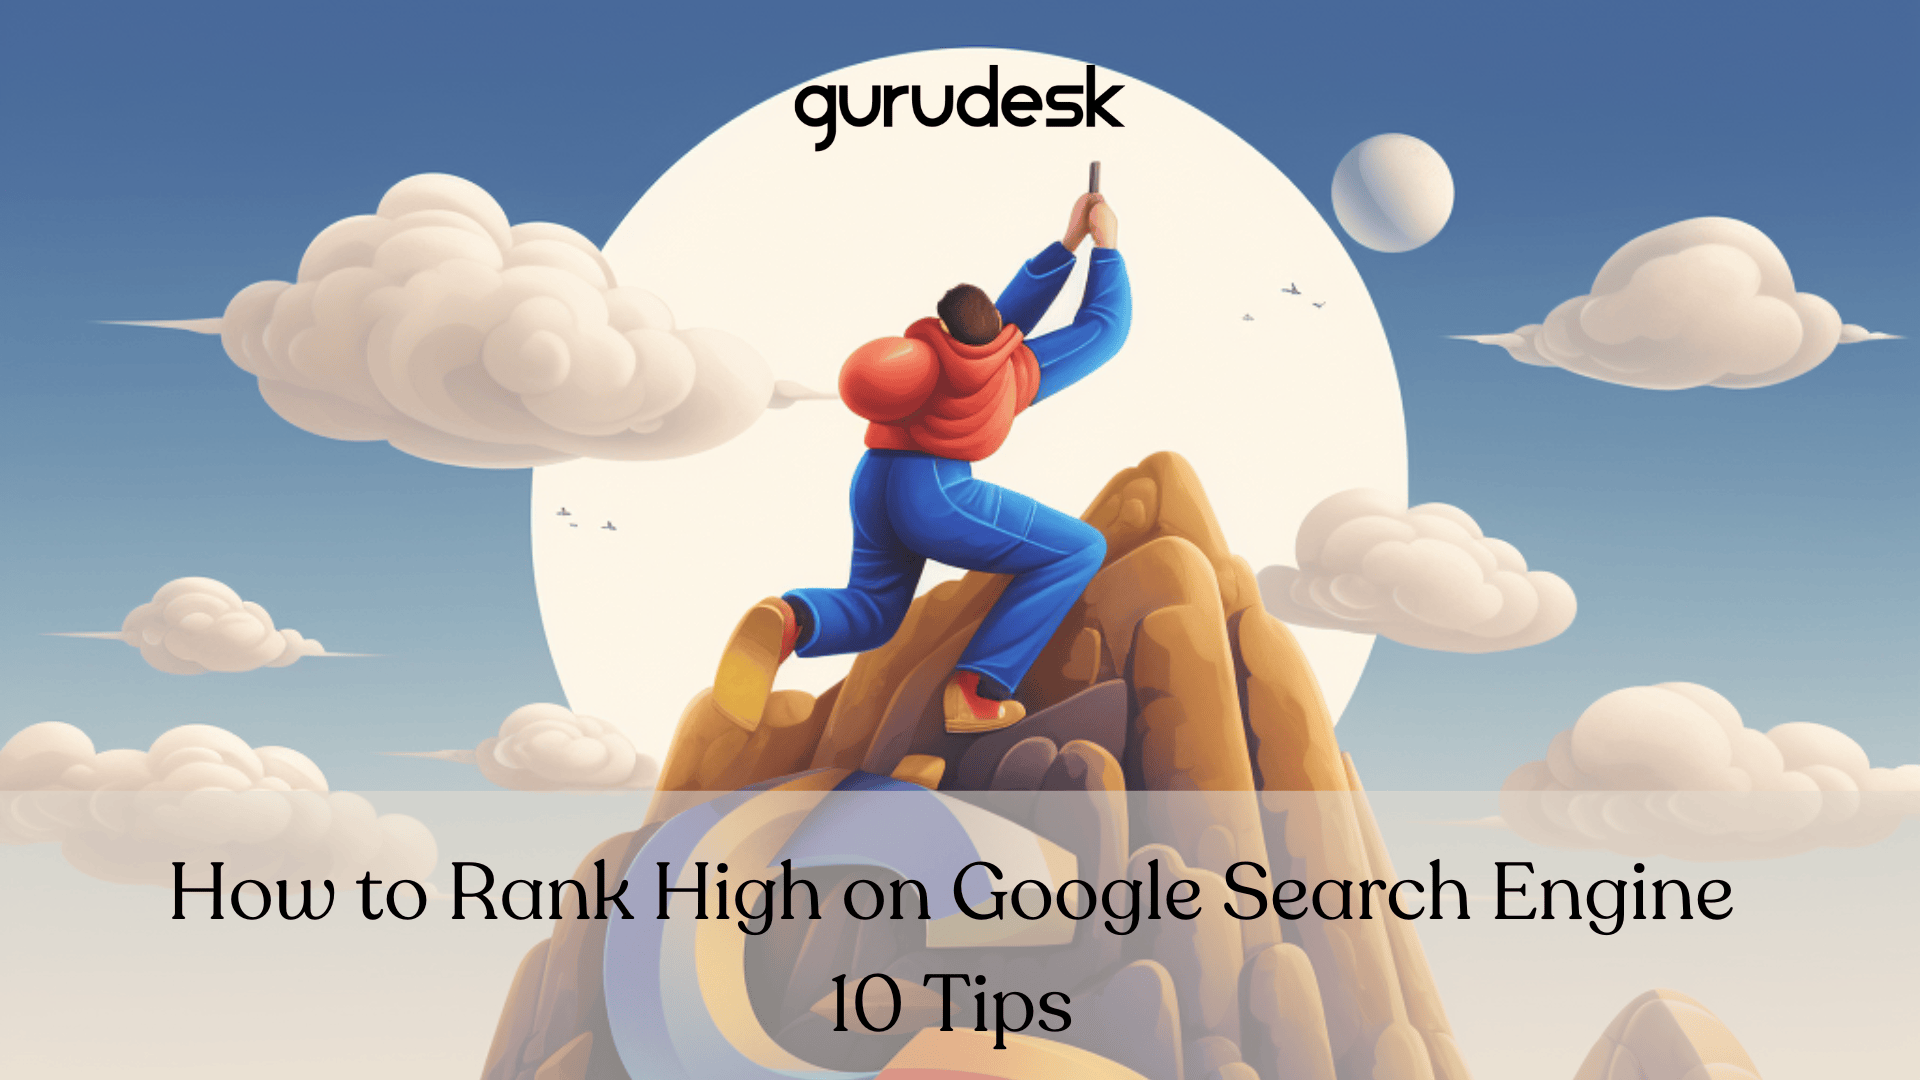 sites rank search engine page rank how to rank high in google serch engines google search engines rank high in search engines rank high in google search engines